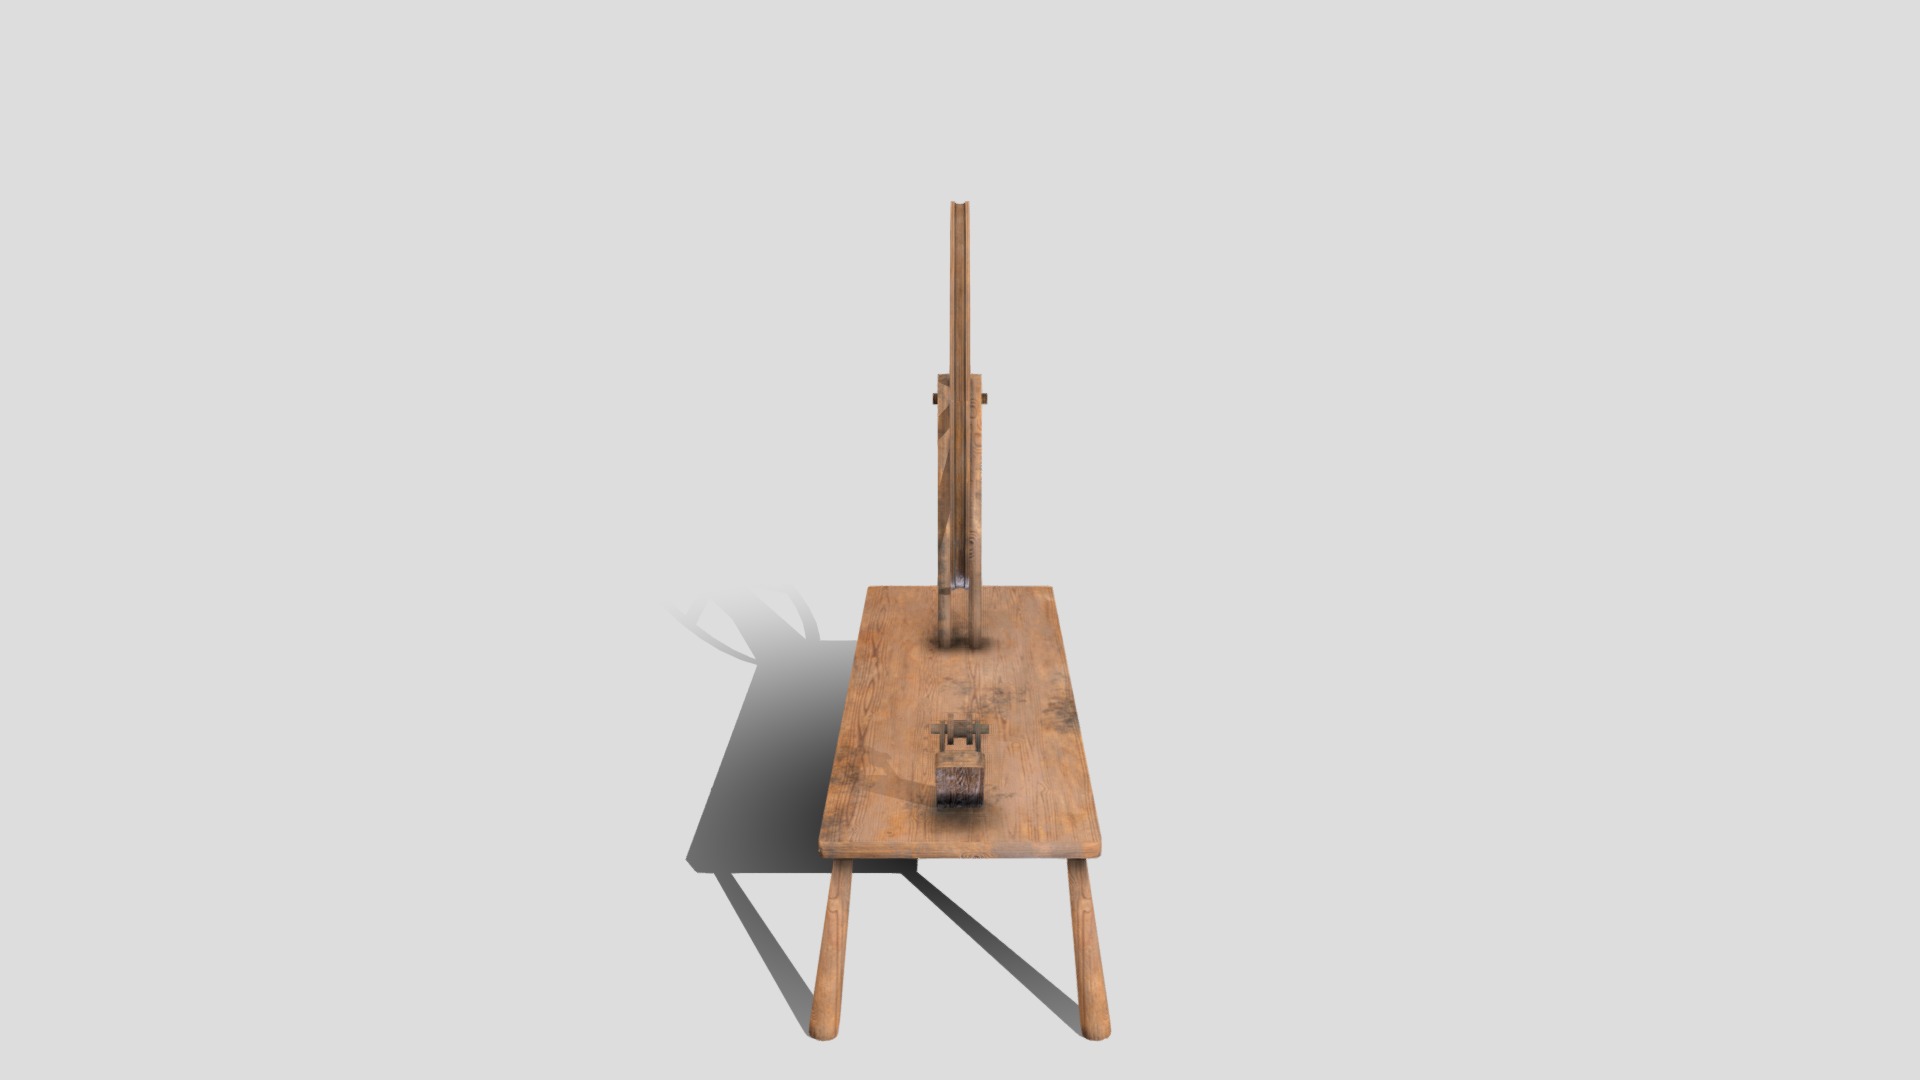 3D model Medieval Spinningwheel - This is a 3D model of the Medieval Spinningwheel. The 3D model is about a wooden birdhouse with a bird on top.